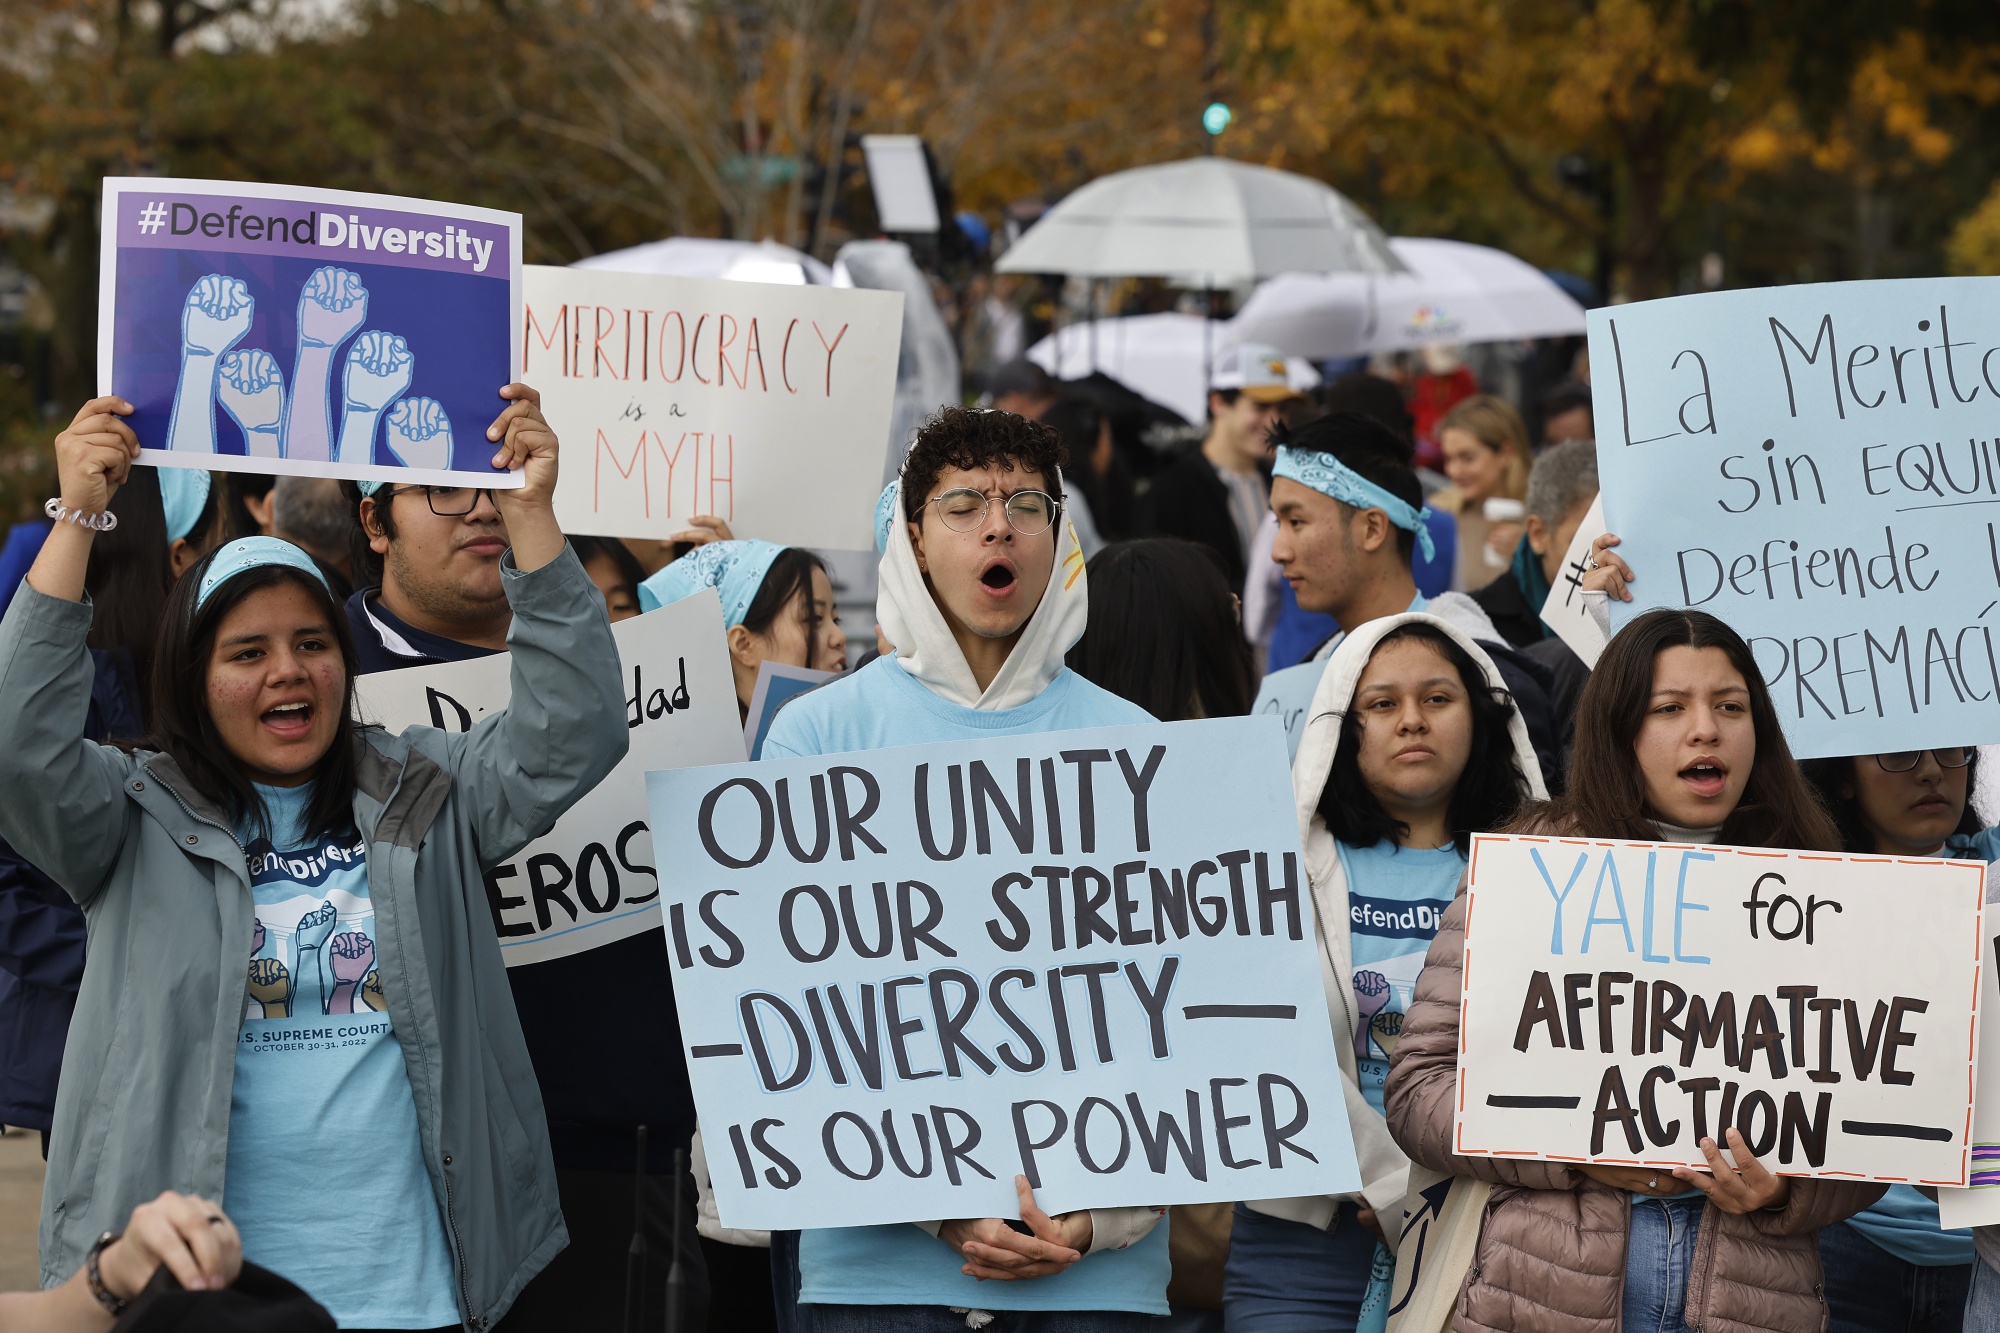 Supreme Court's Affirmative Action Ruling Shows Equality for All